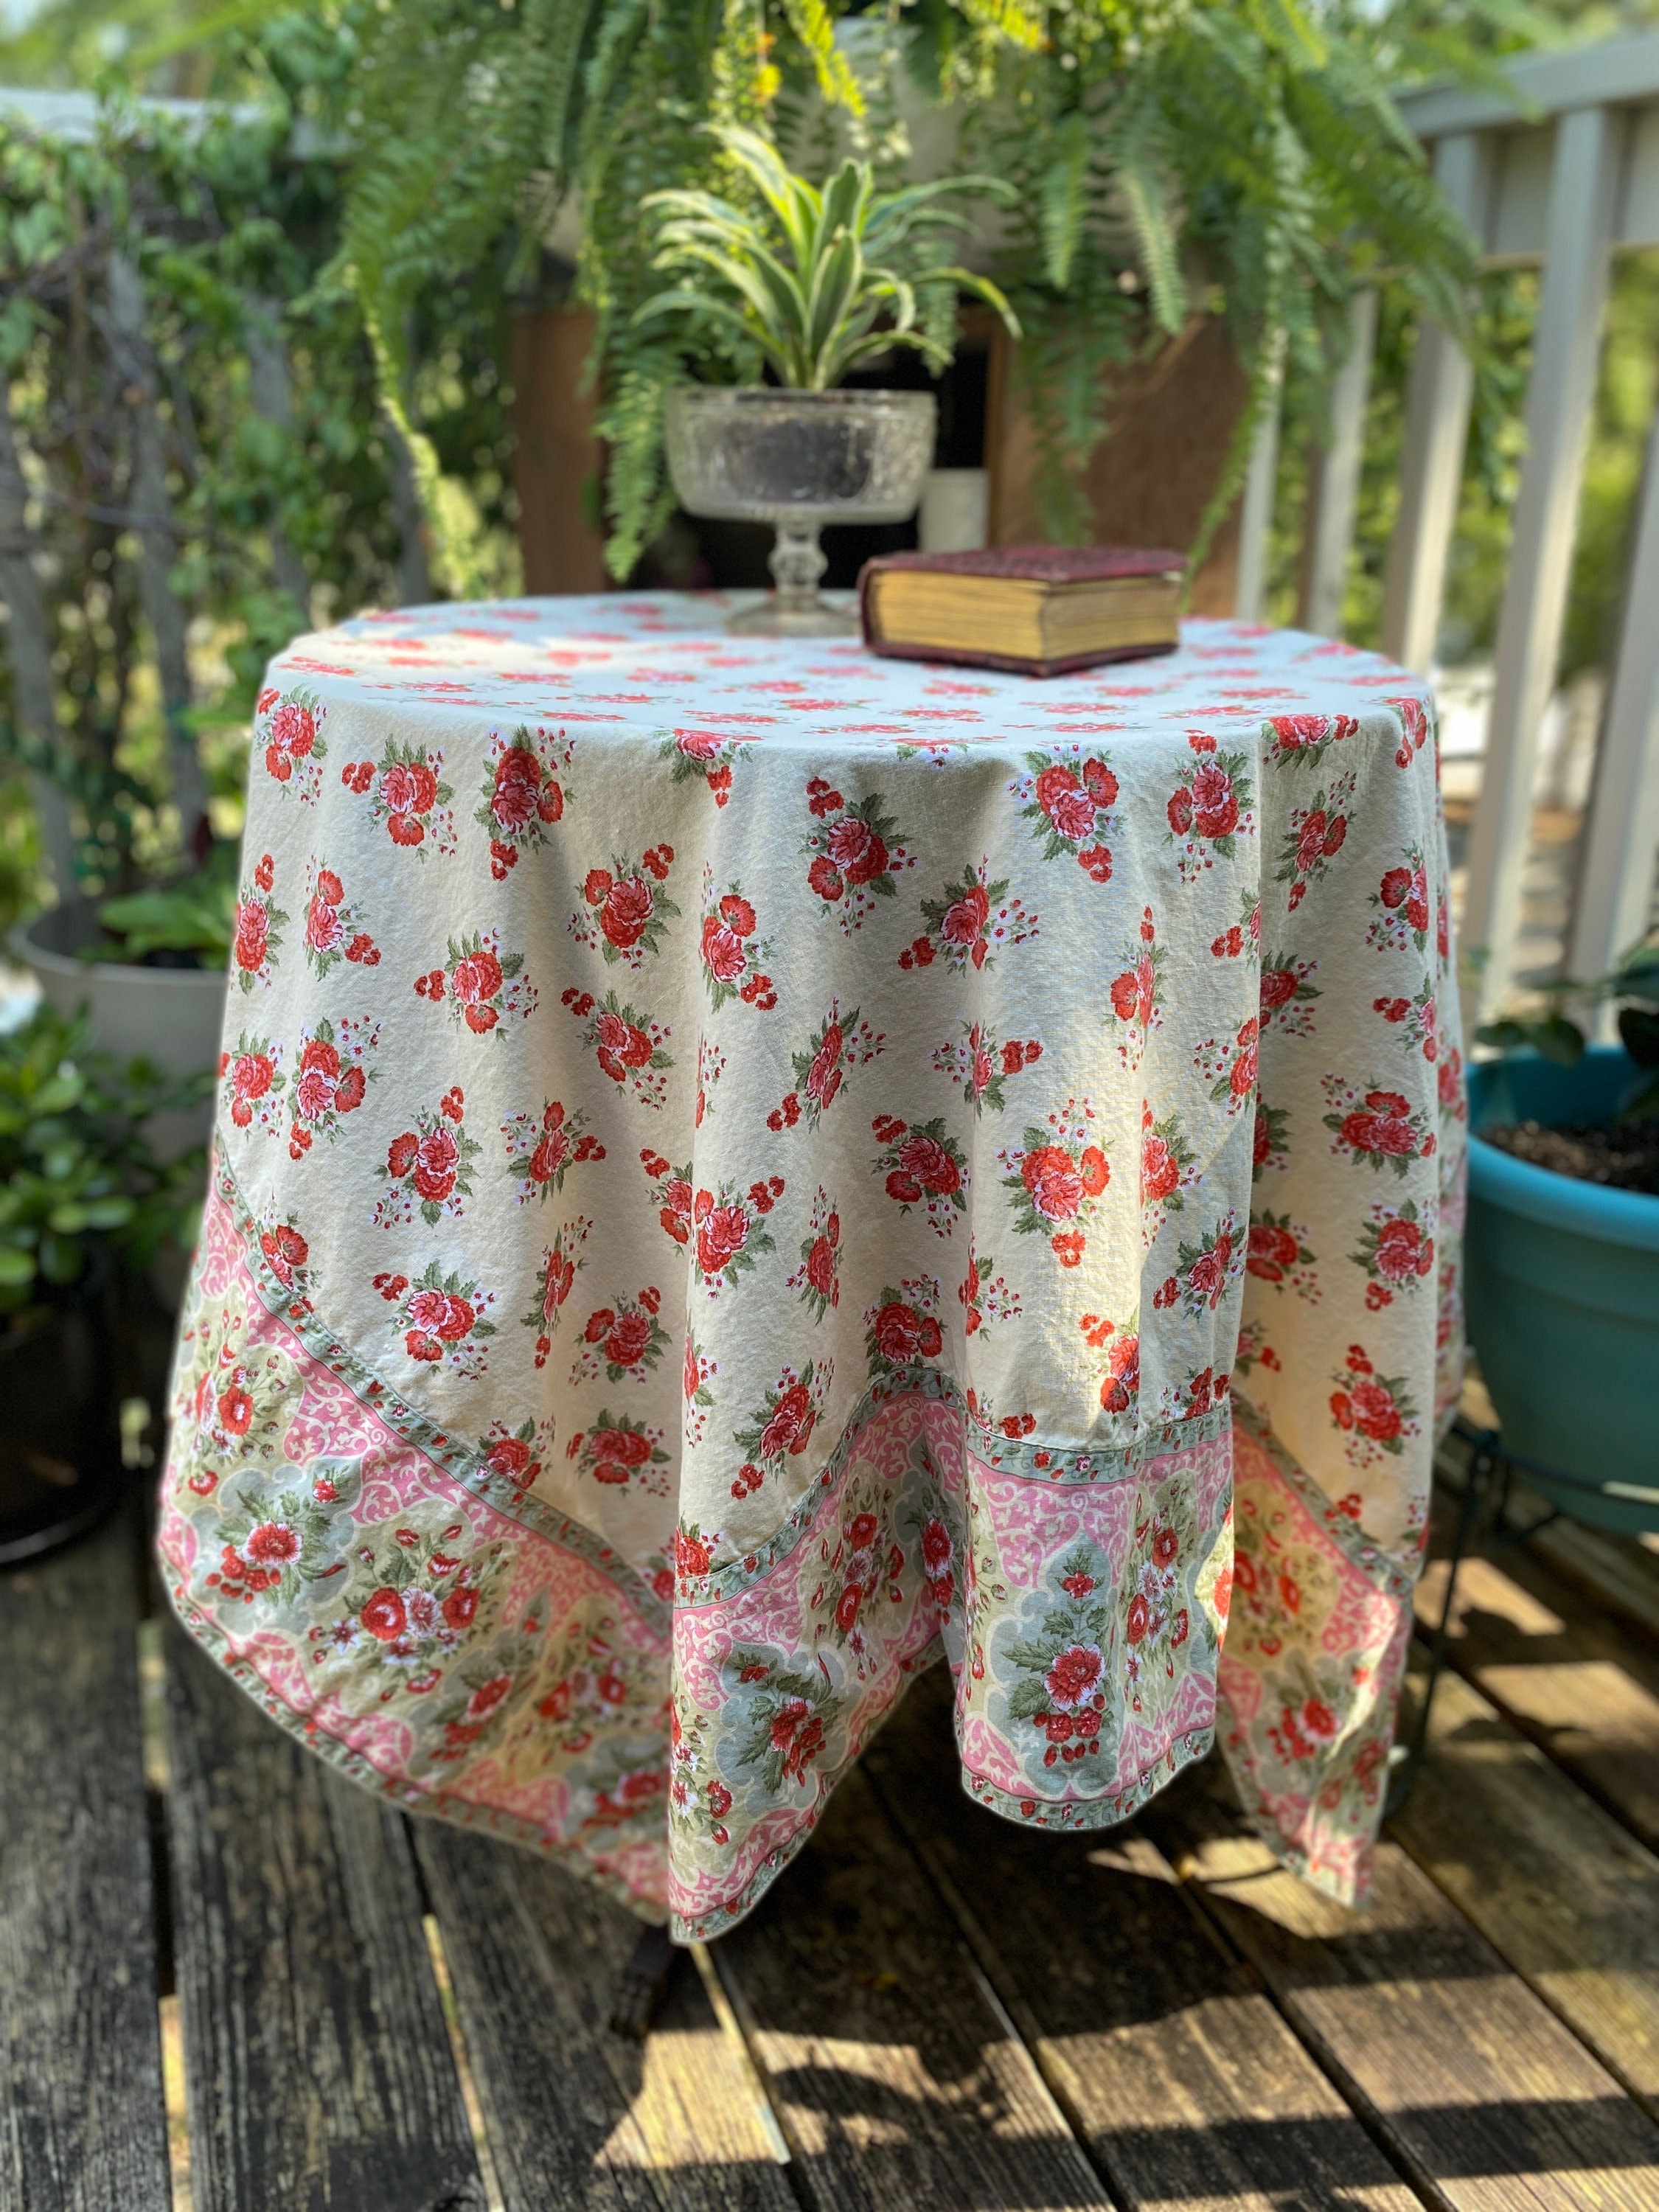 Prairie Flower Tablecloth /, 100% Cotton, Size 60x90 | April Cornell | Square Tablecloths for Tablescaping